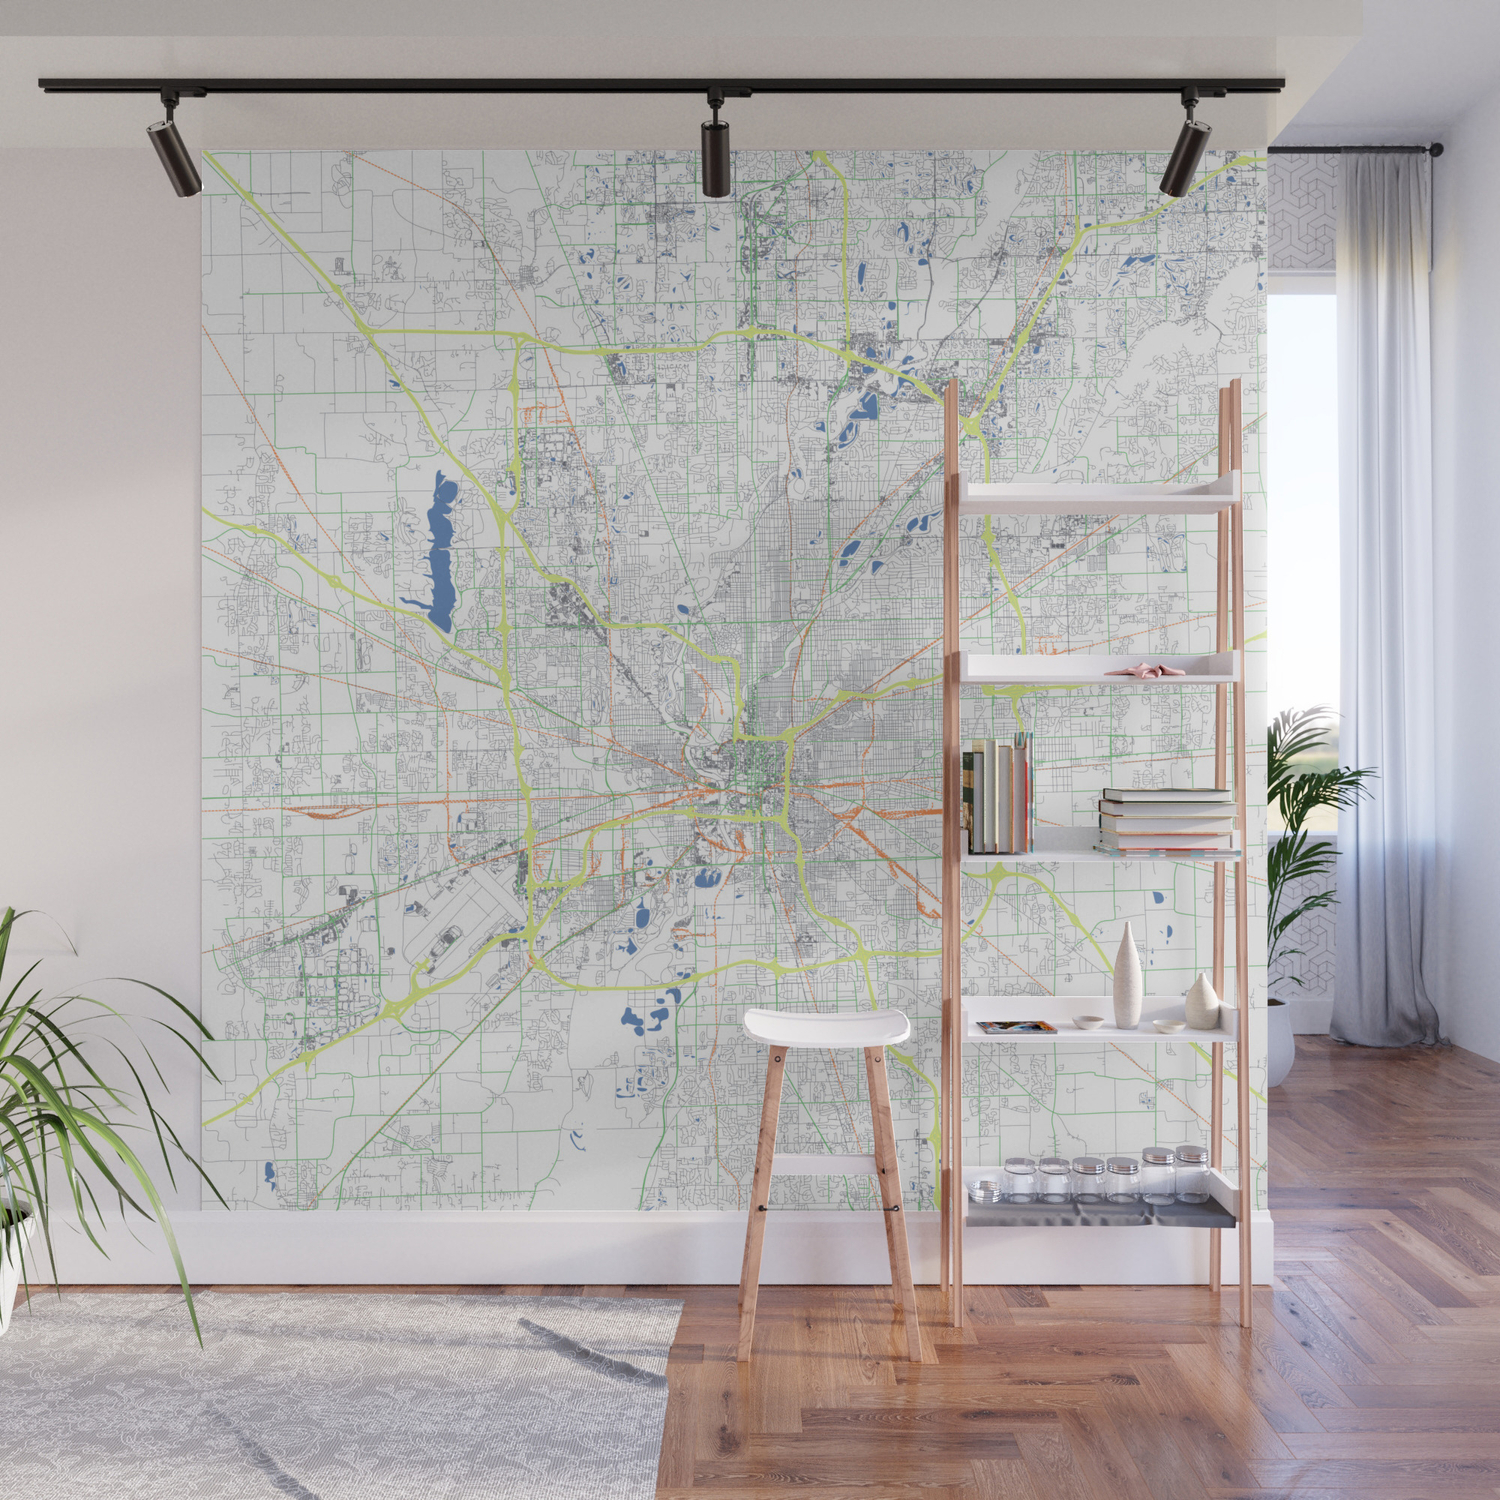 Indianapolis Pop Urban Map Wall Mural By Alisammarraie Society6